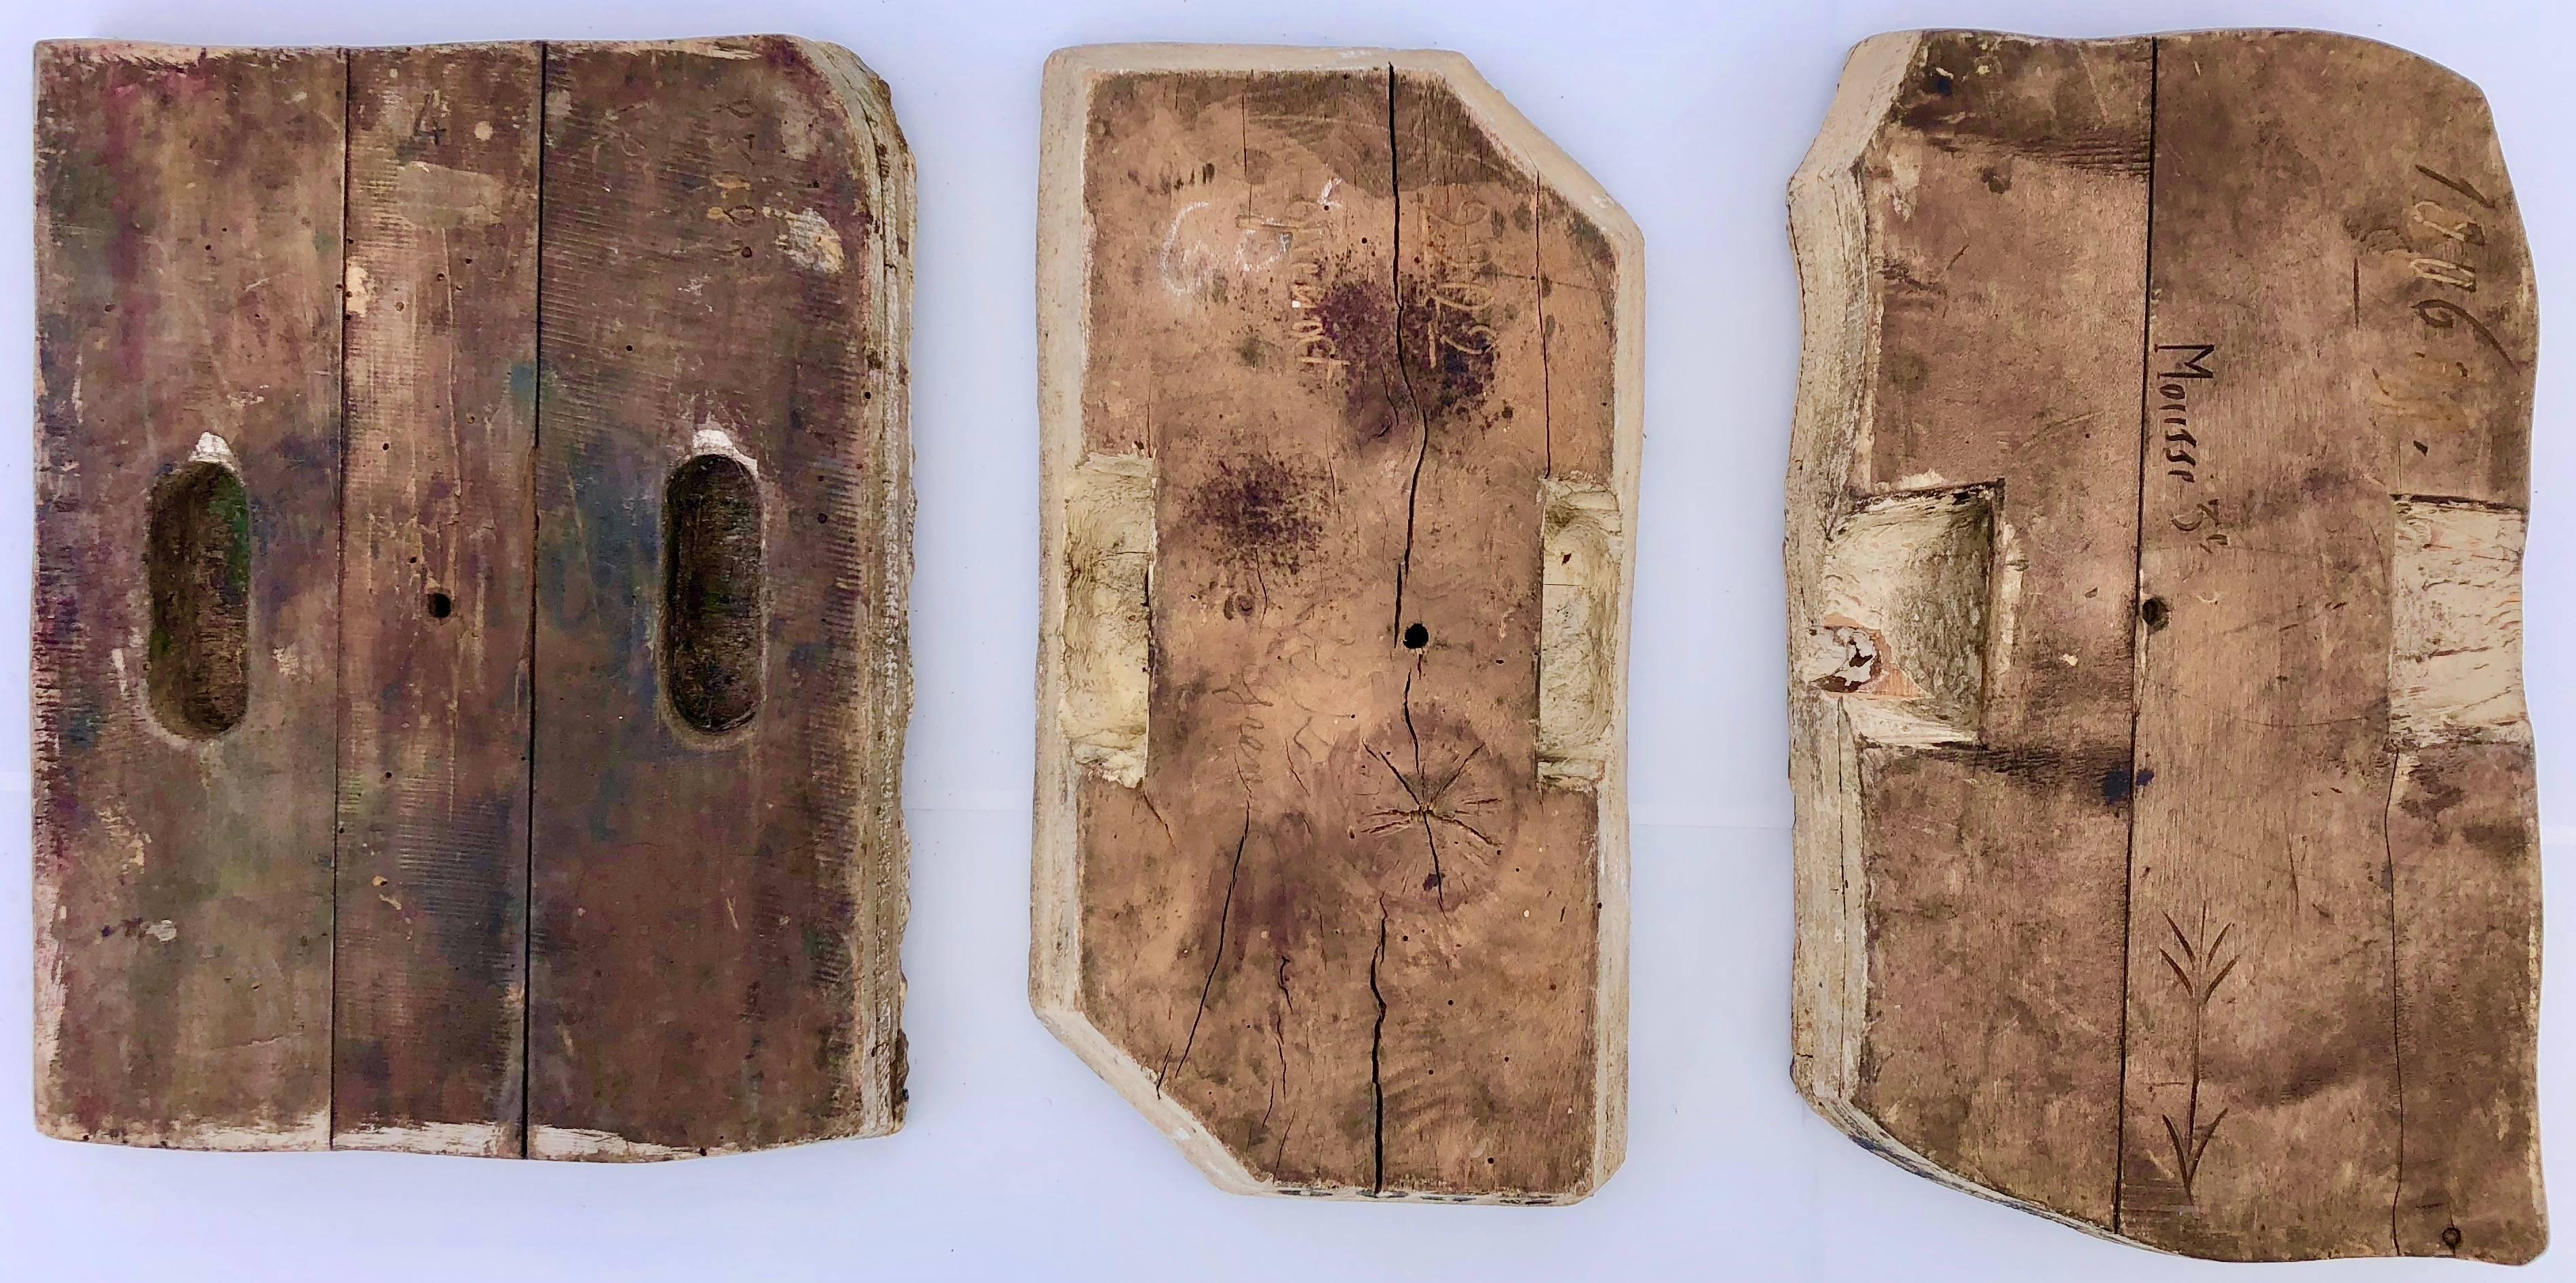 19th Century Unique Wooden Fabric Printing Blocks, Rhône Region, France 1800s Collection For Sale